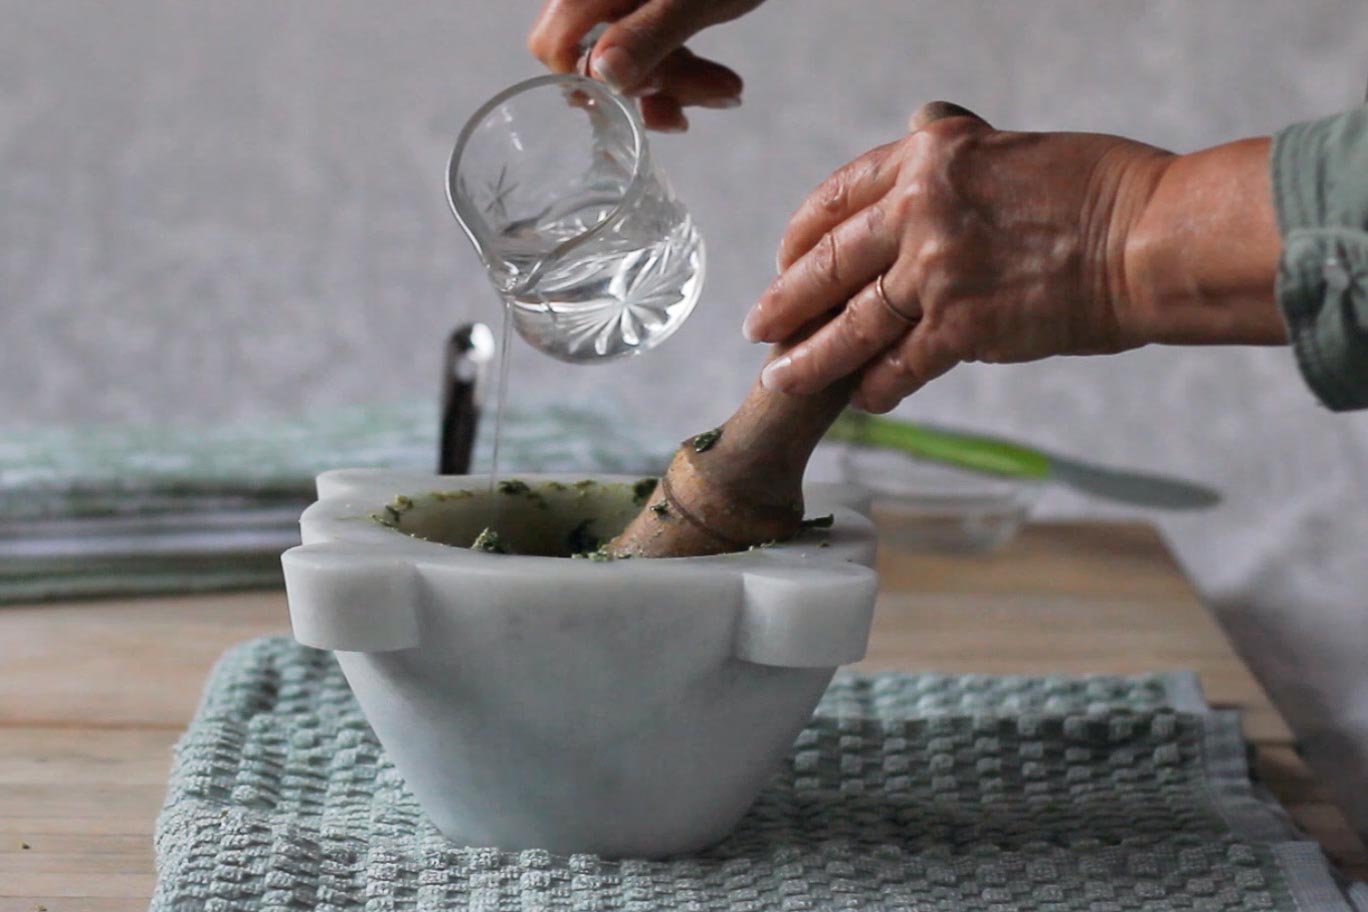 Pouring water from a small glass pitcher into the marble mortar on a board